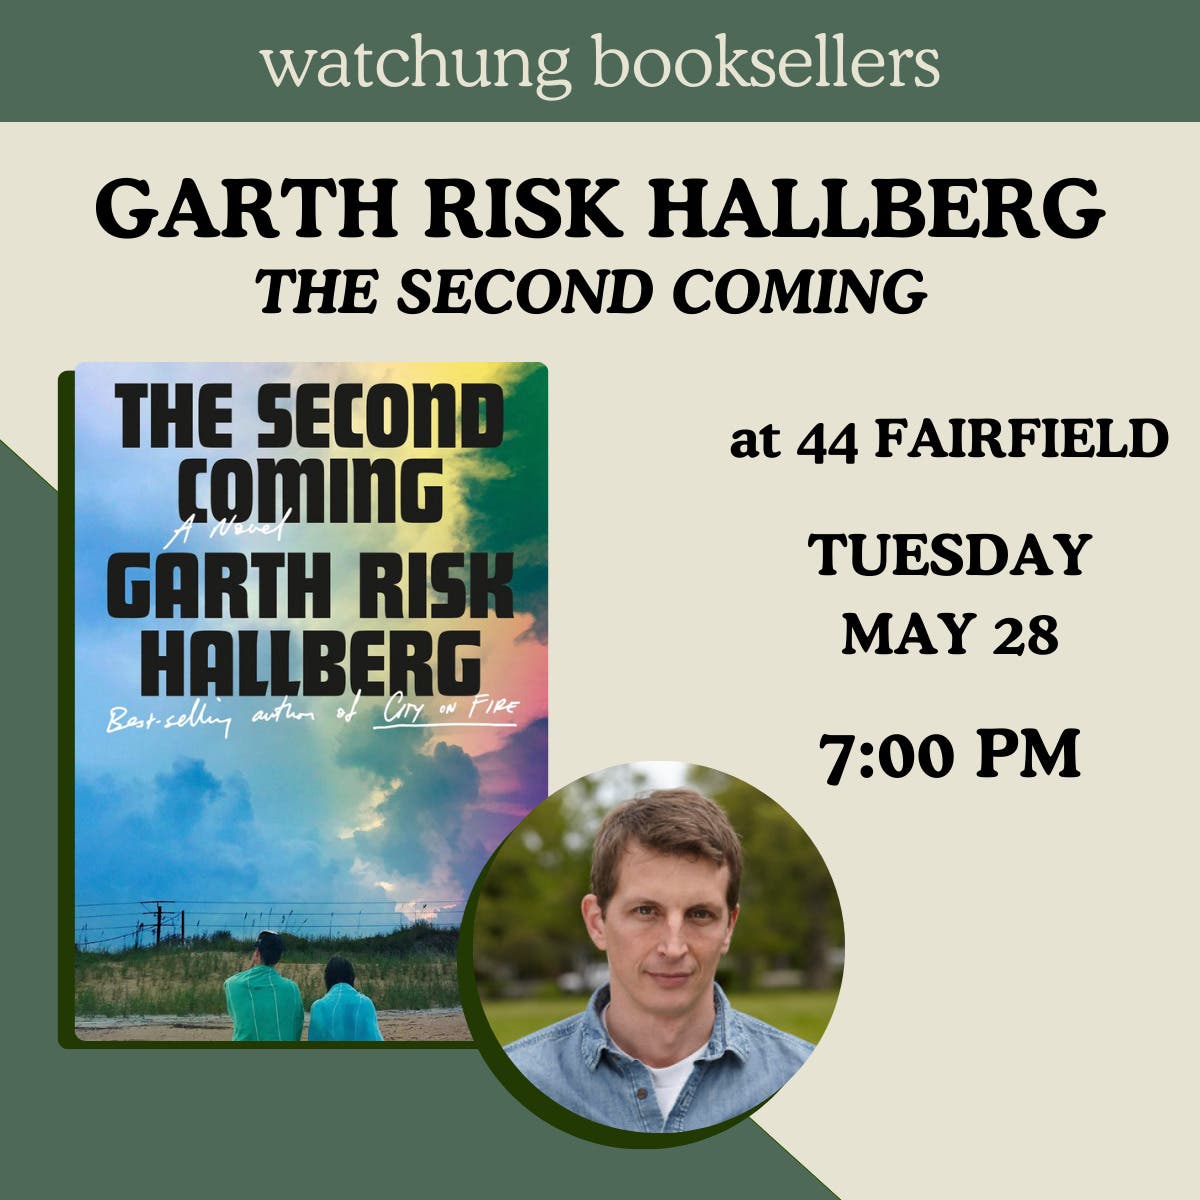 Watchung Booksellers Welcomes Bestselling Author Garth Risk Hallberg